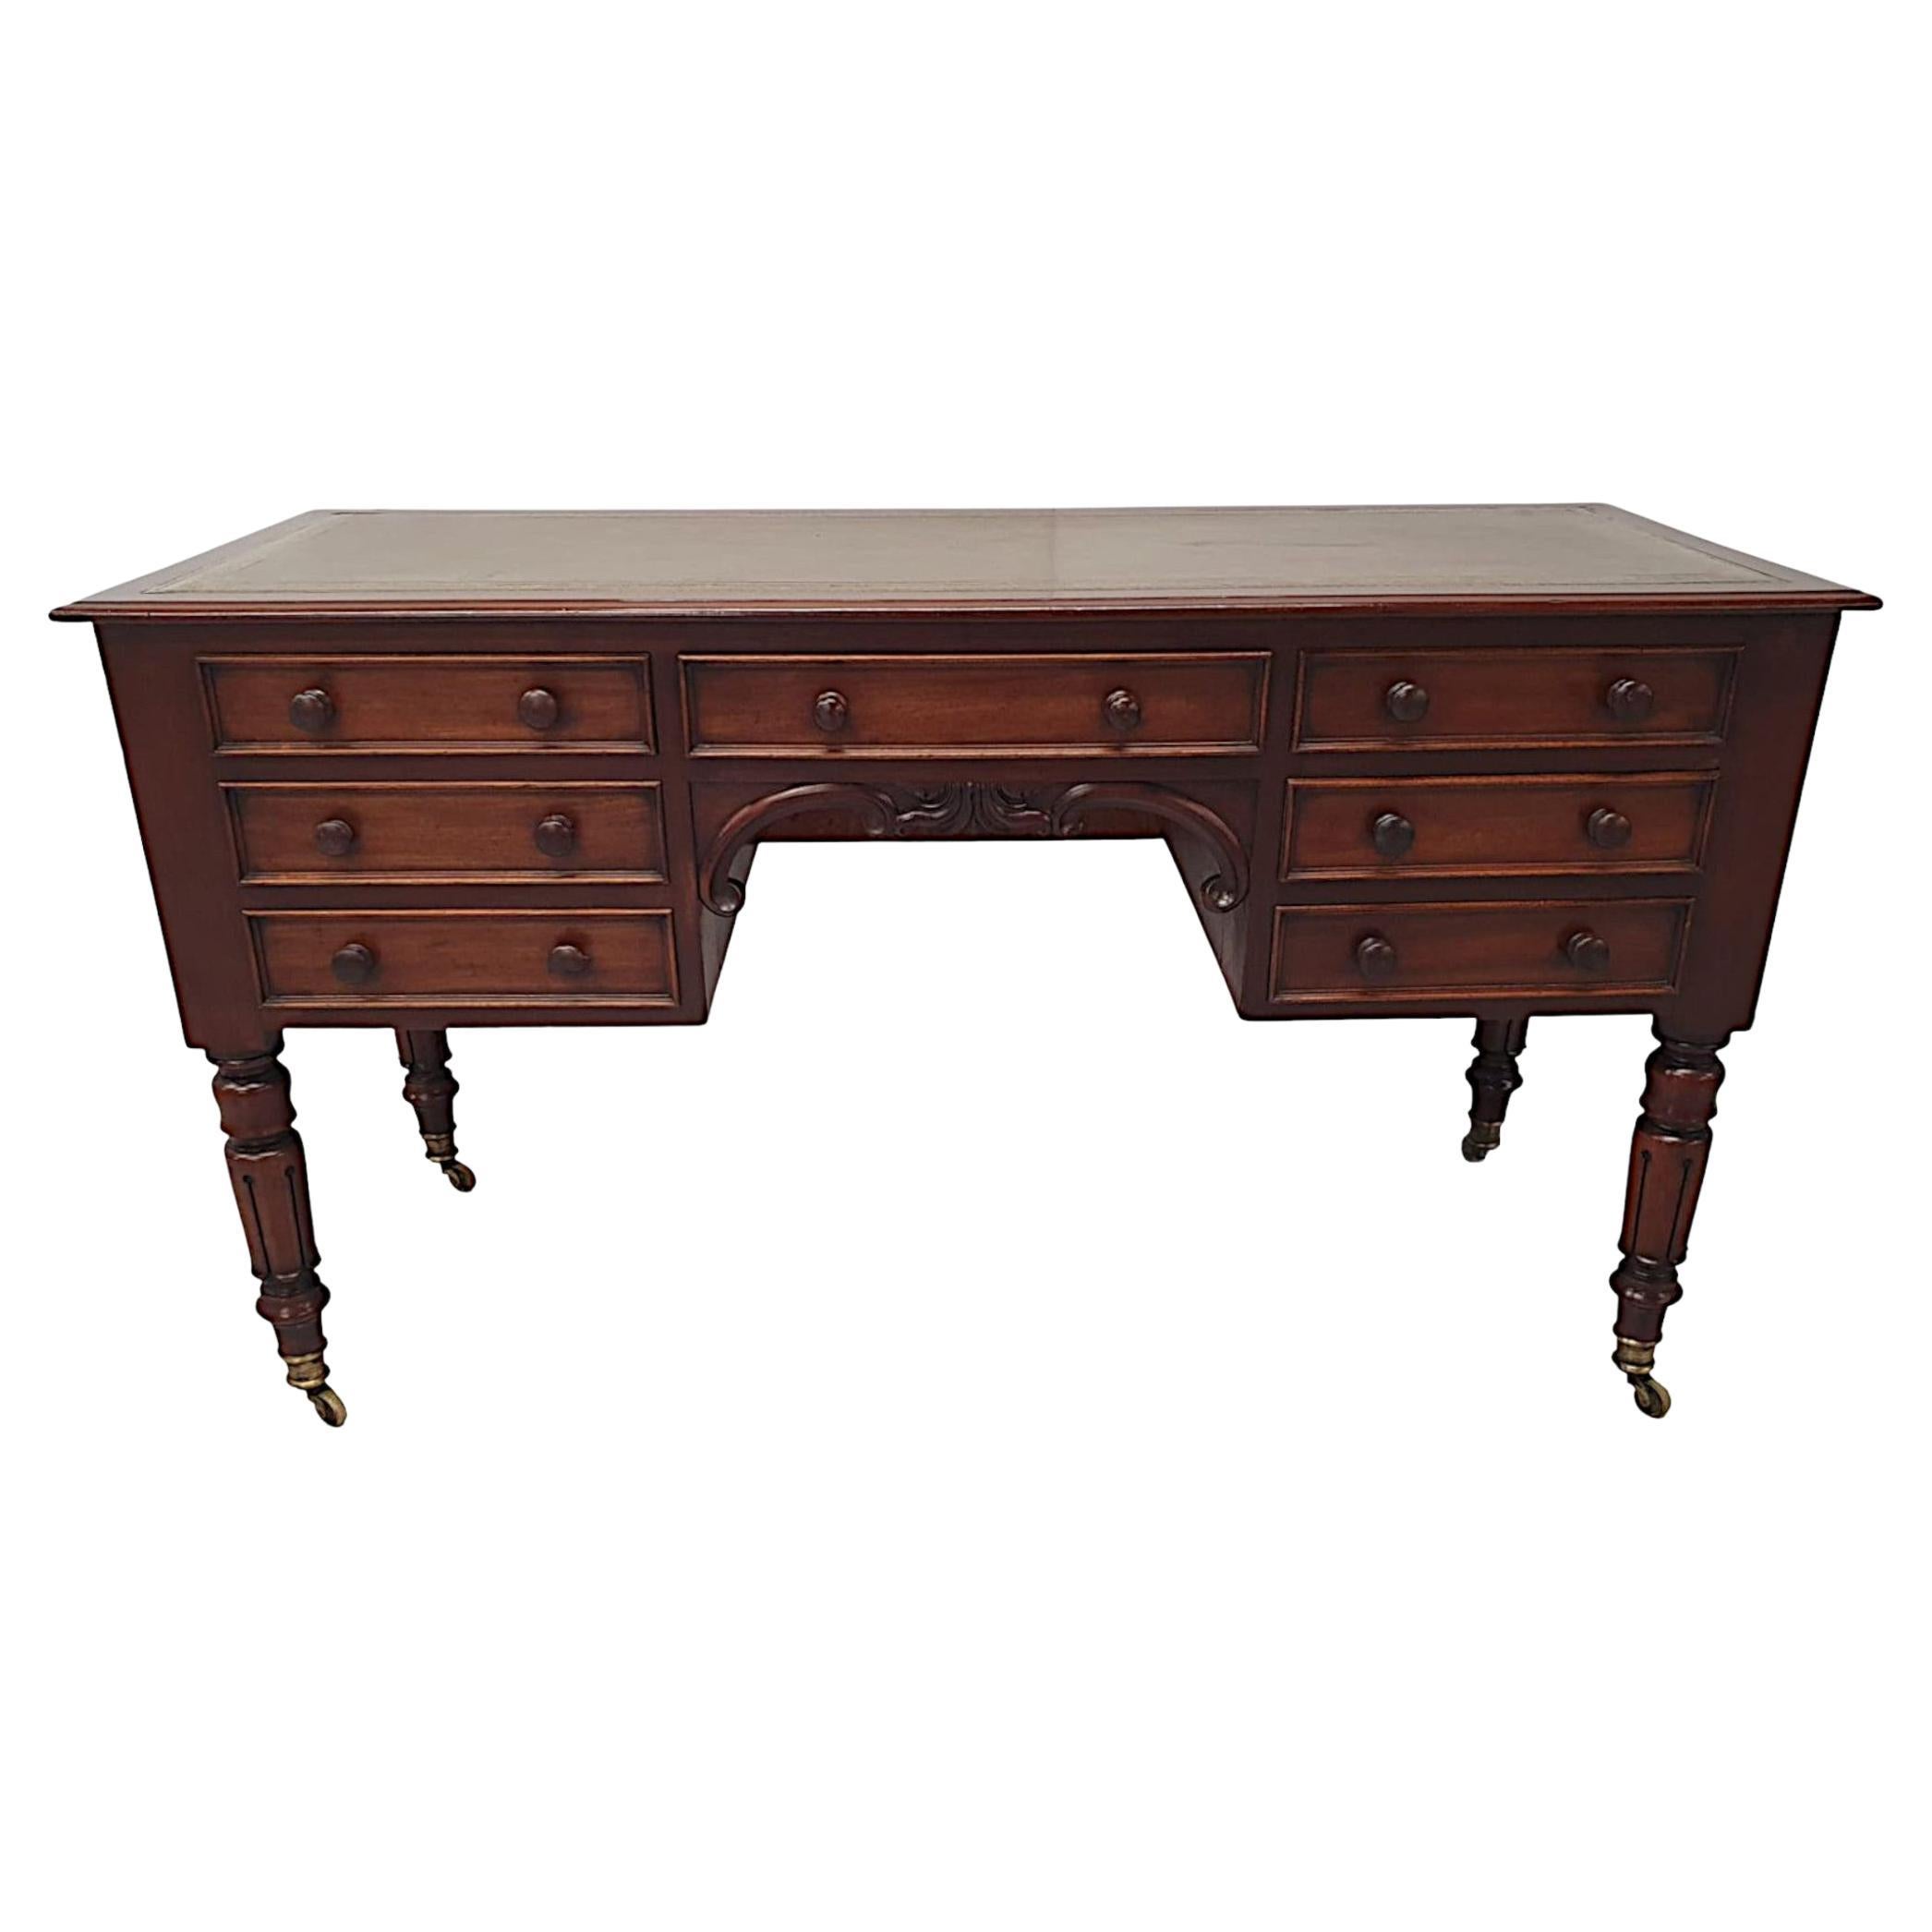  A Very Fine Early 19th Century William IV Leather Top Desk 